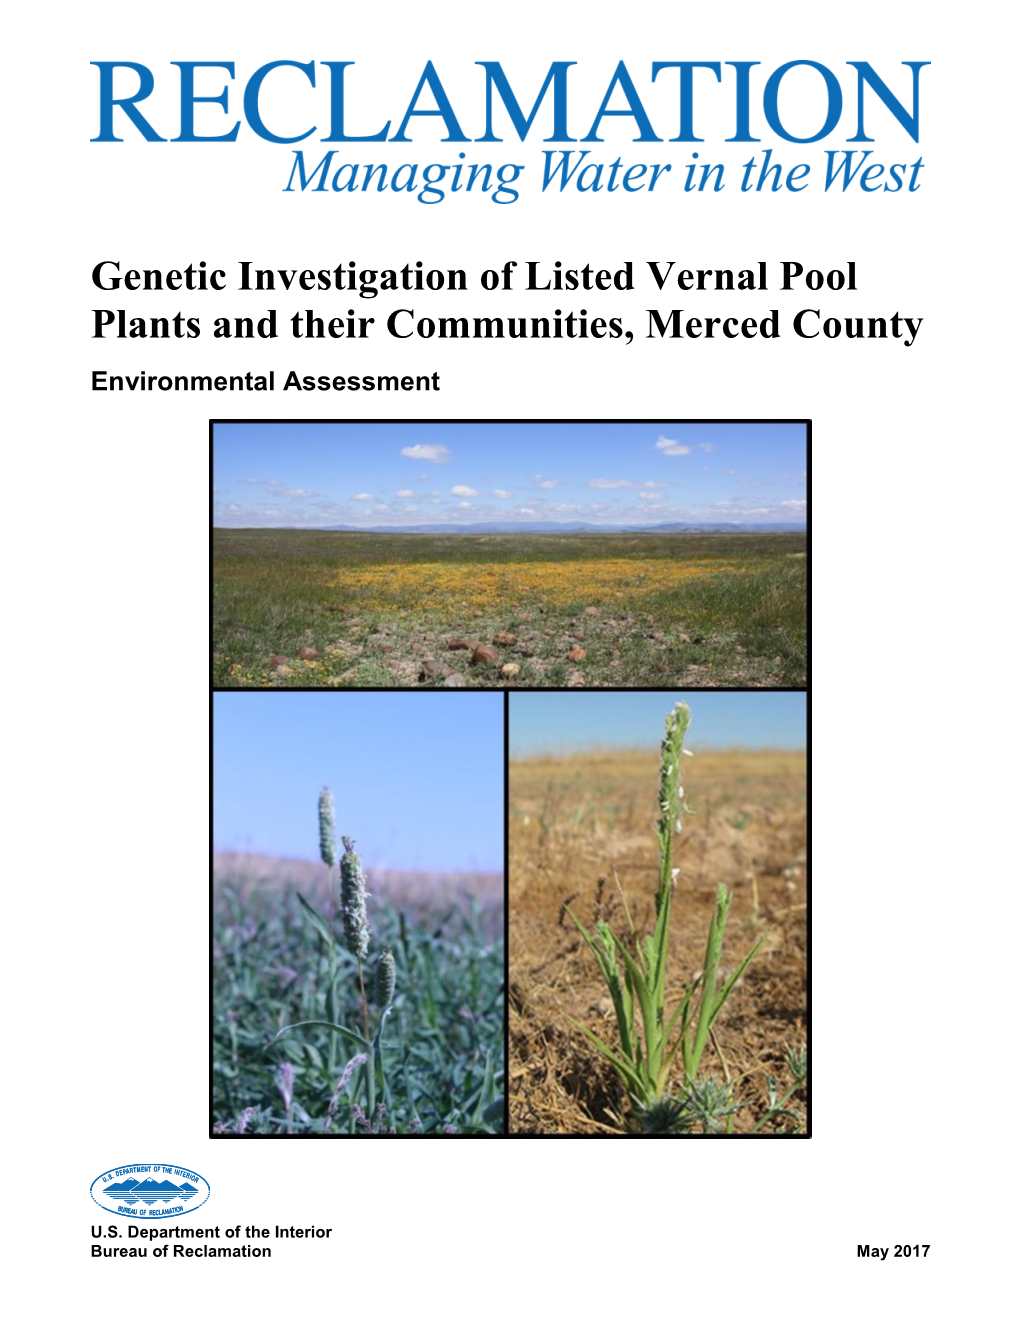 Genetic Investigation of Listed Vernal Pool Plants and Their Communities, Merced County